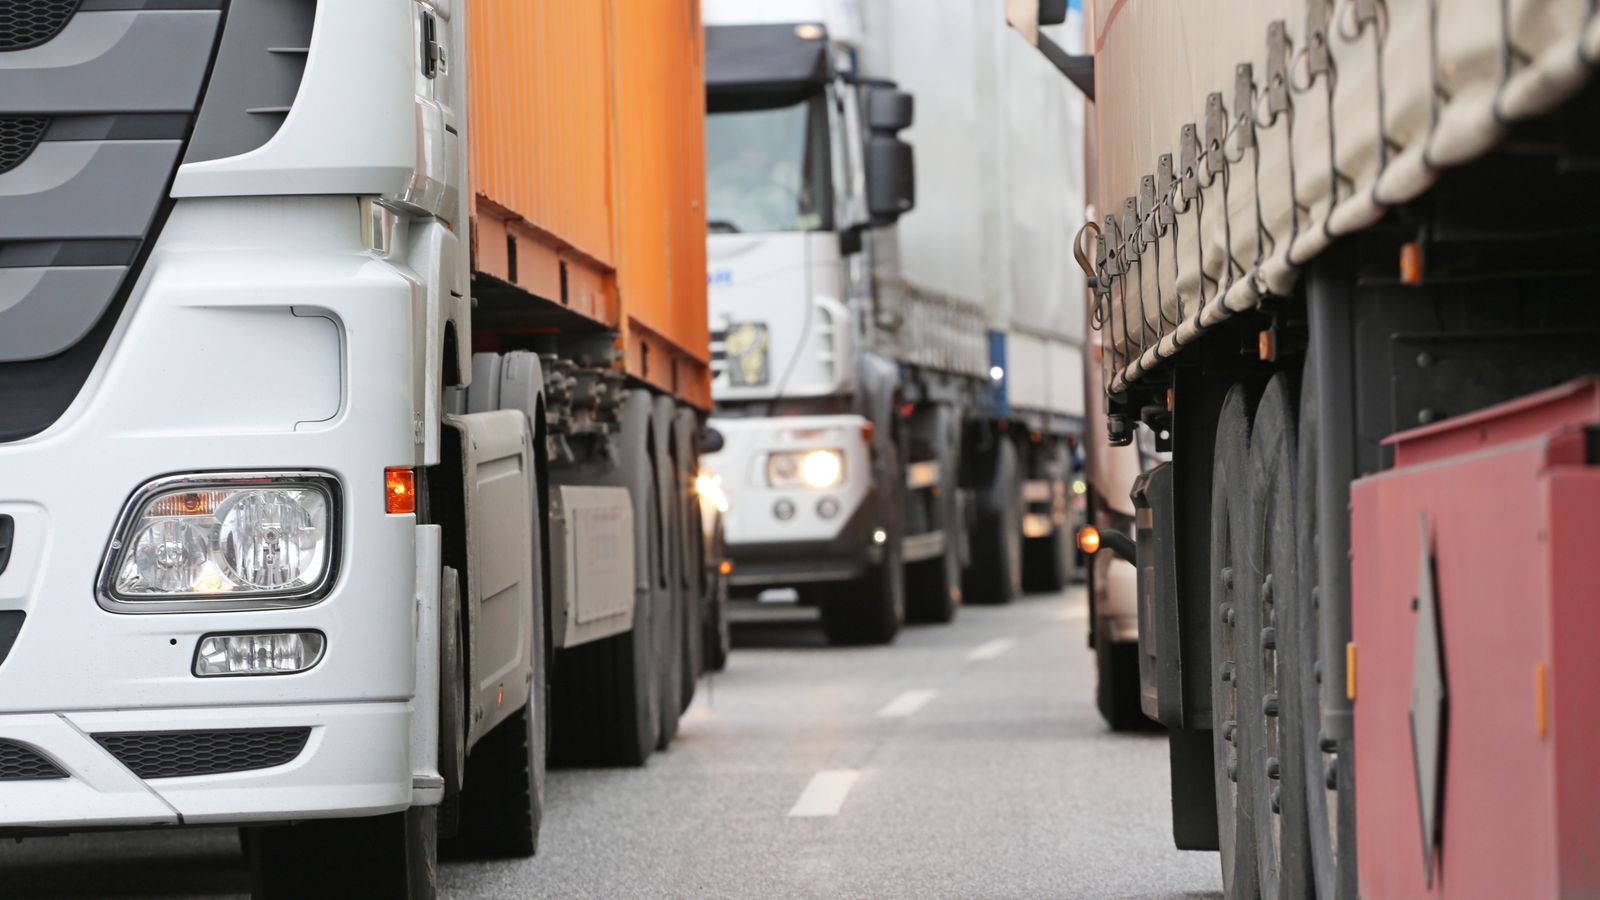 Government believed to be looking at measures to tackle shortage of HGV drivers amid supply chain issues